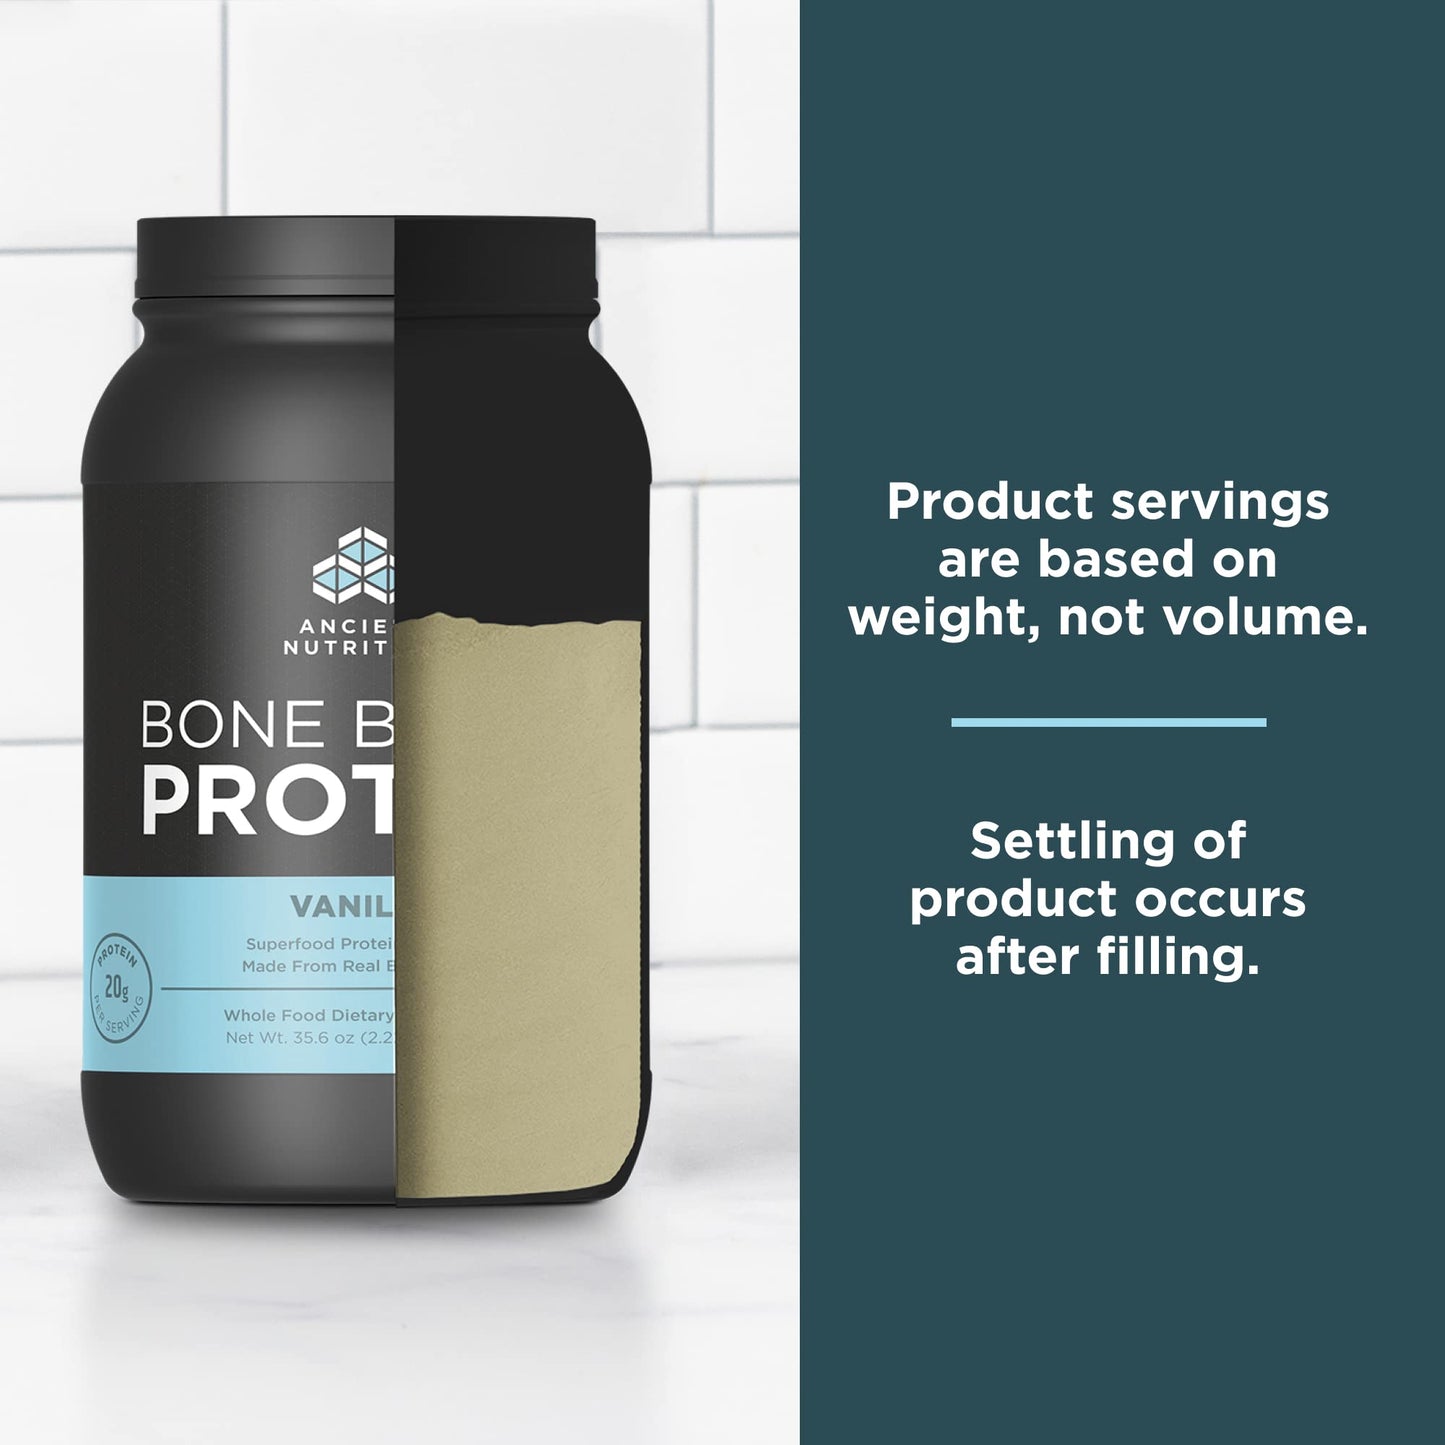 Ancient Nutrition Protein Powder Made from Real Bone Broth, Vanilla, 20g Protein Per Serving, 40 Serving Tub, Gluten Free Hydrolyzed Collagen Peptides Supplement, Great in Protein Shakes